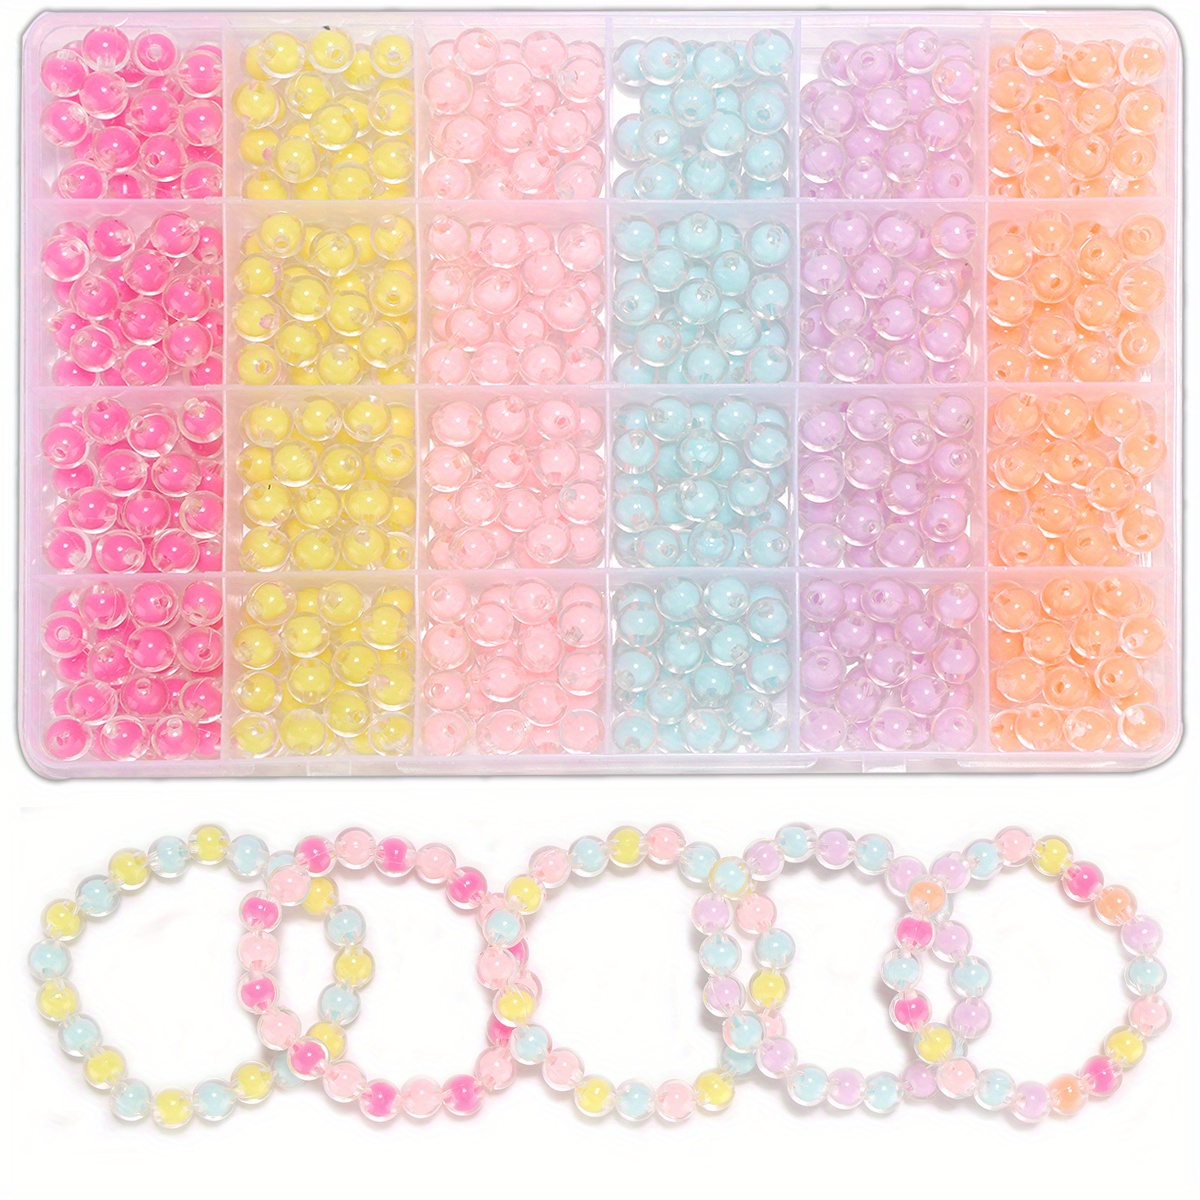 DIY Colorful Beads Bracelet Making Kit for Girls Birthday Gift, 8mm Acrylic  Transparent Bead in Bead Beads for Mobile Phone Chain Jewelry Making Kit